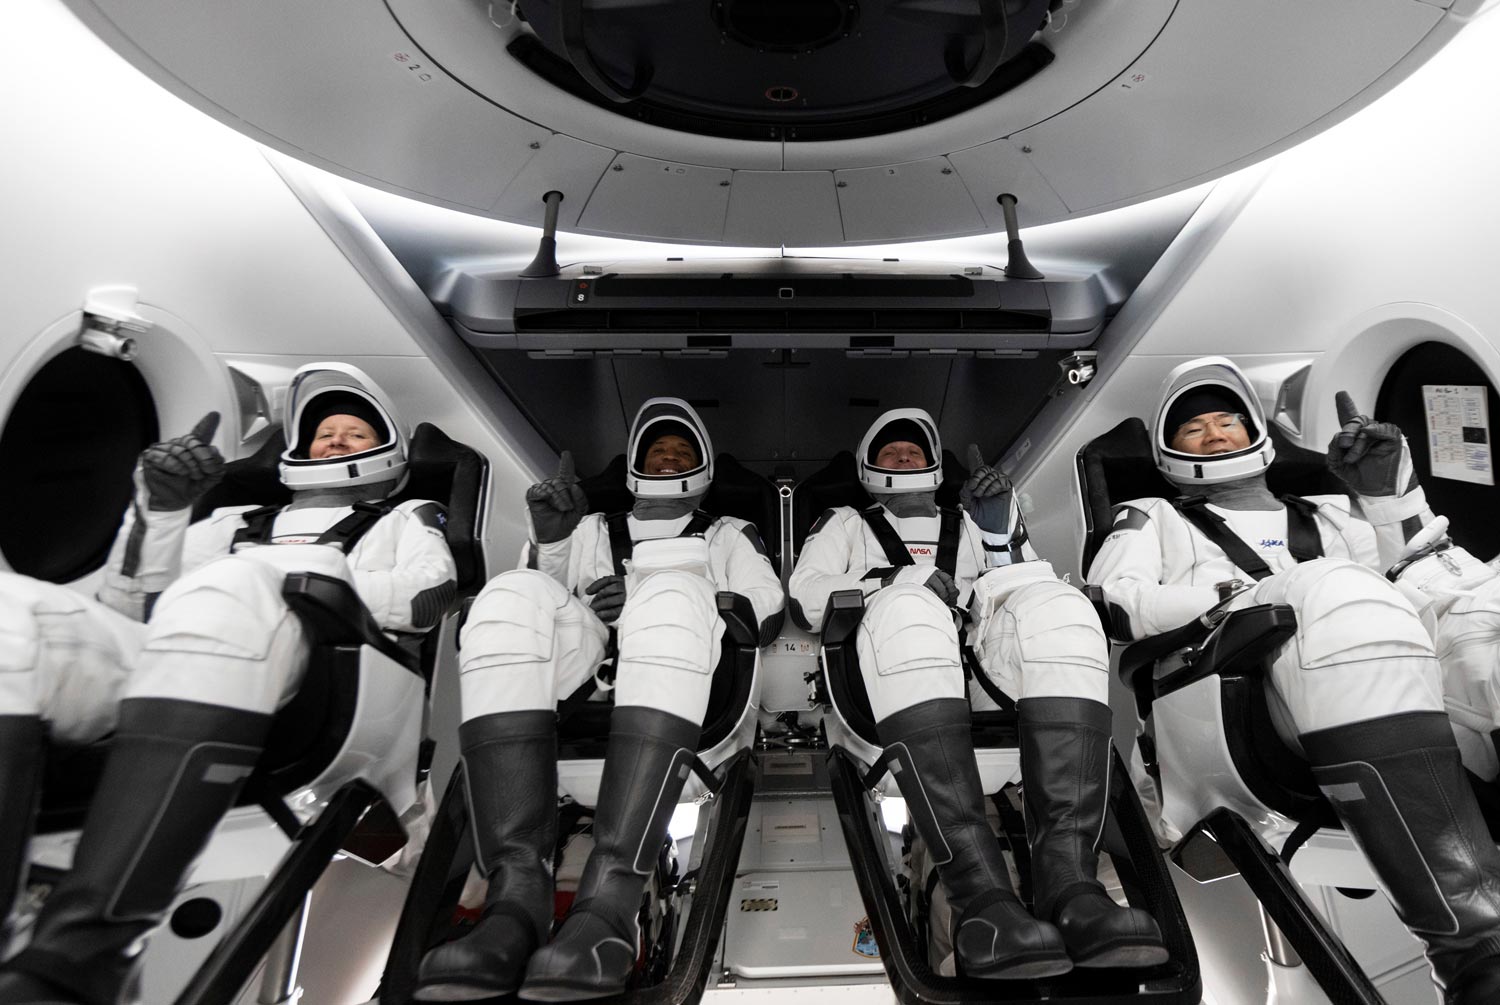 SpaceX Crew 1